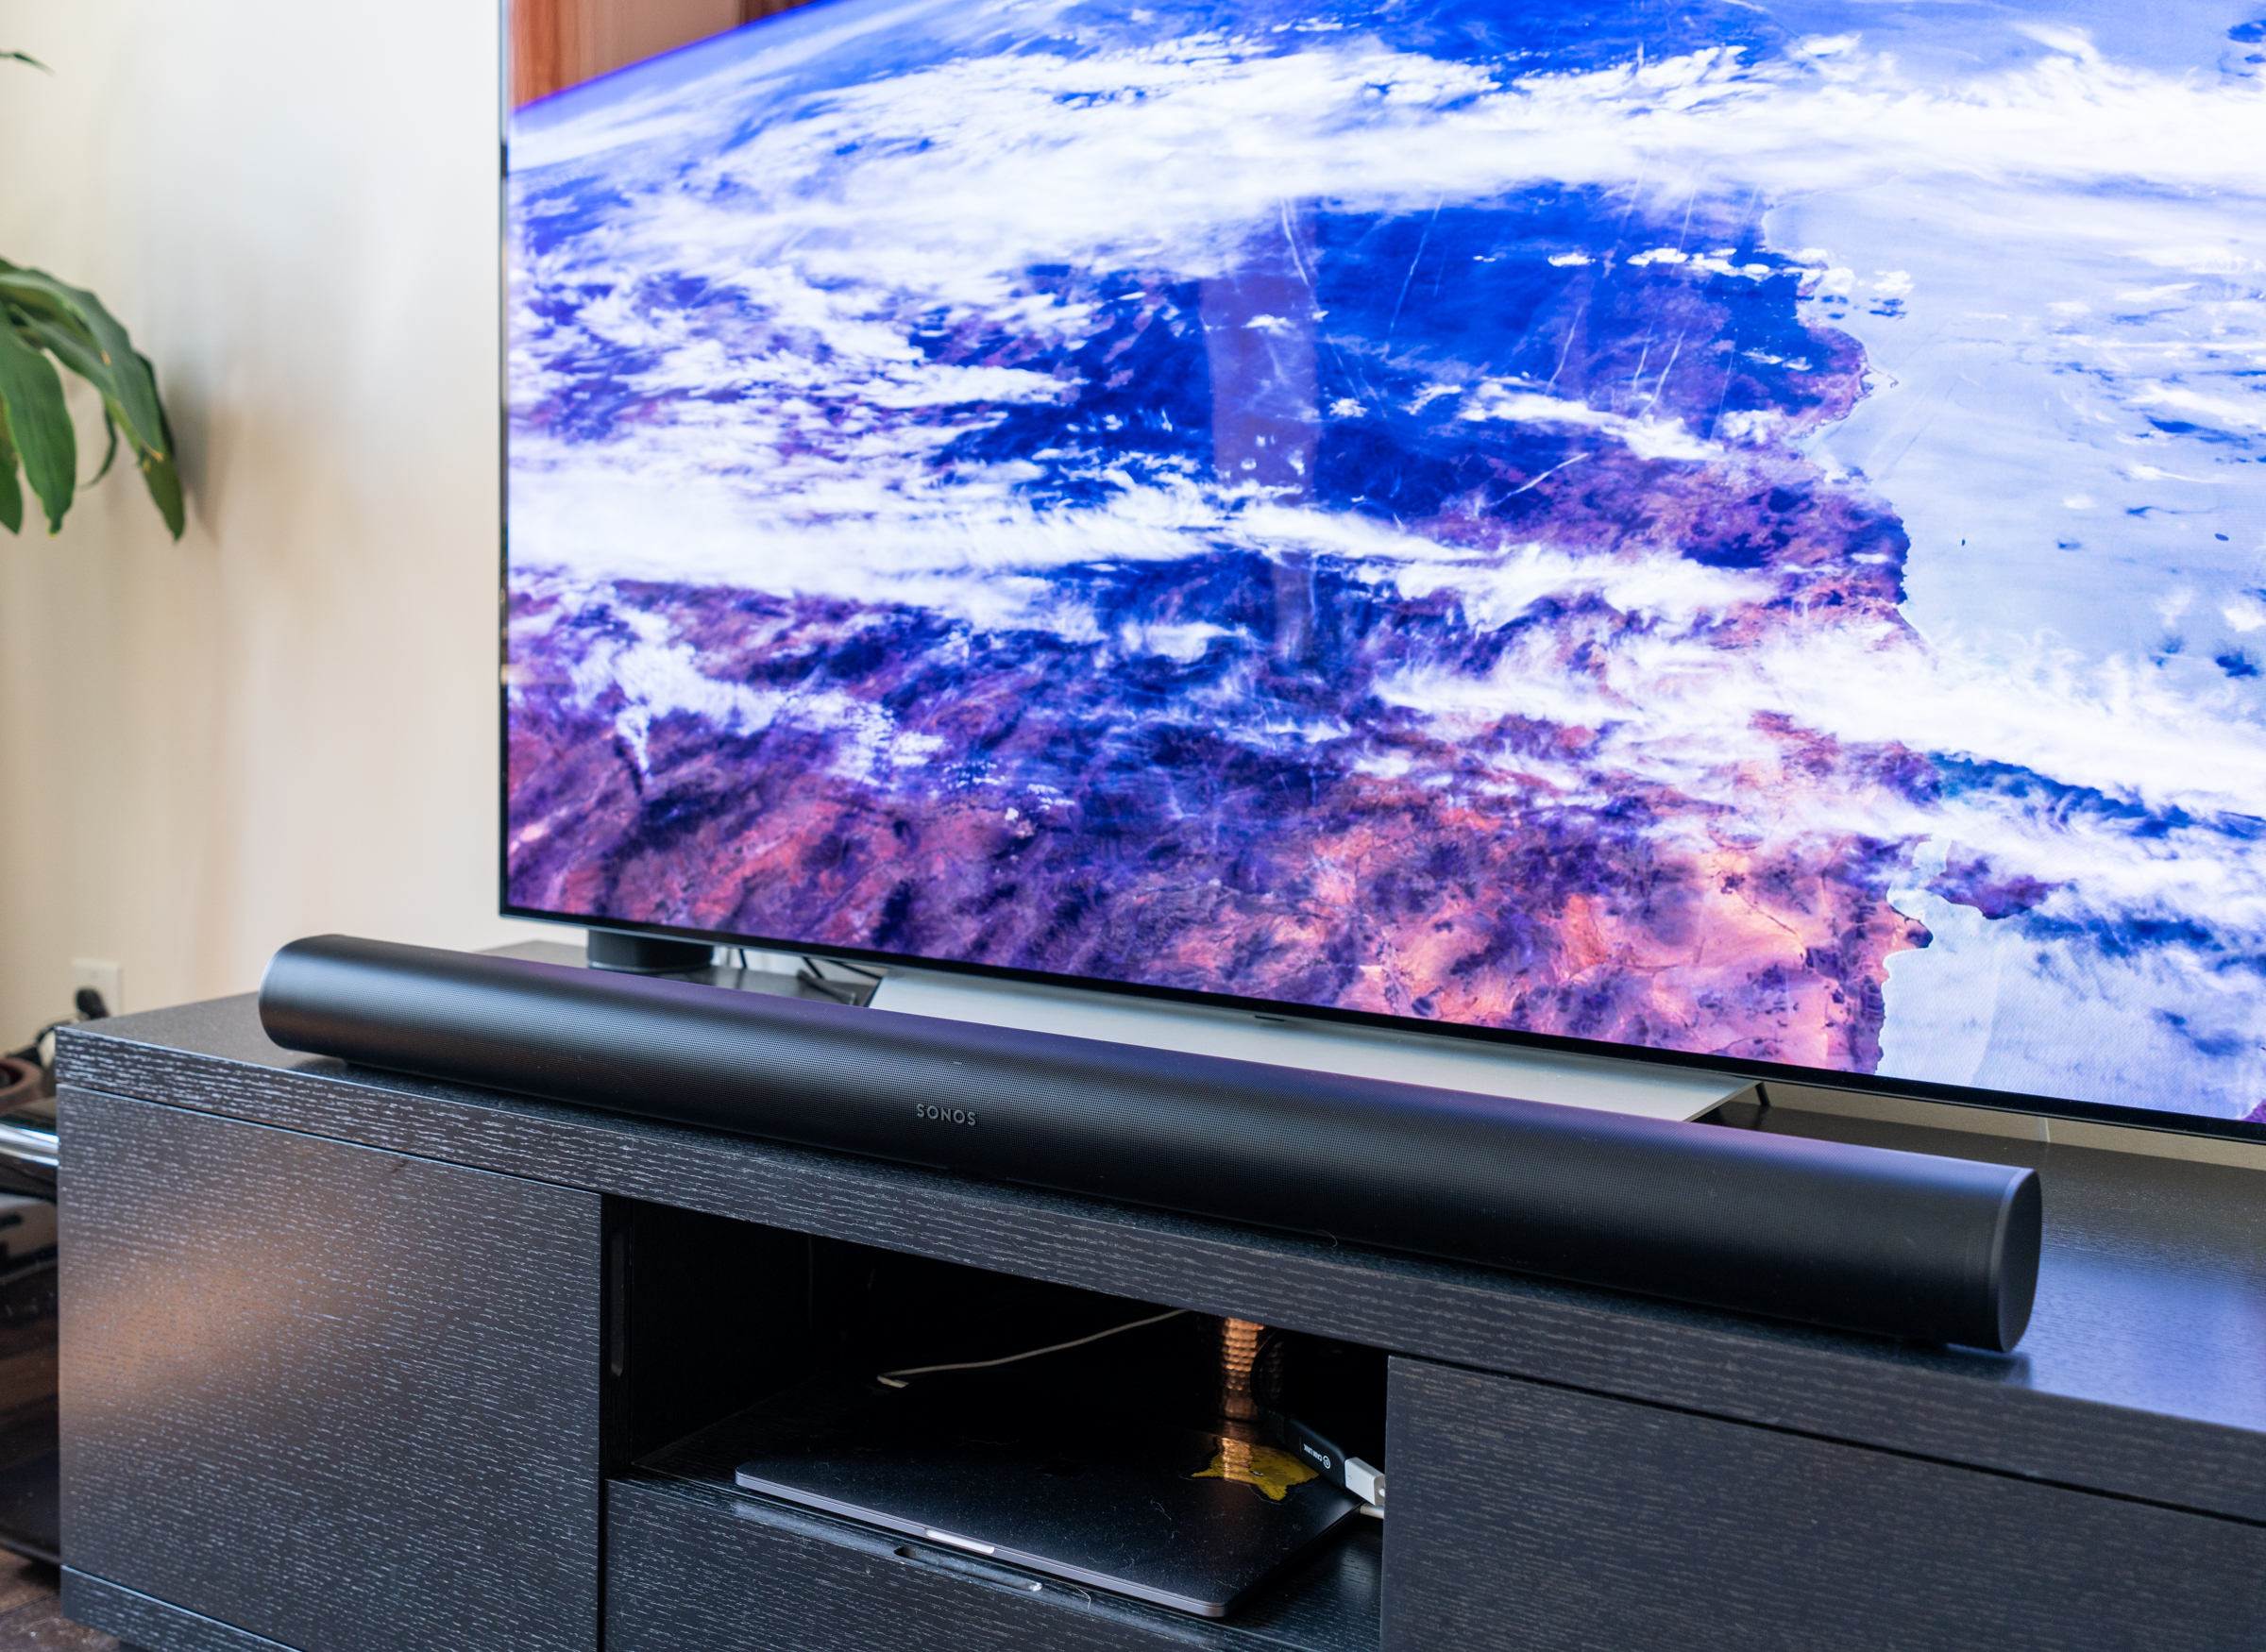 peeling Smelte legetøj The Sonos Arc is an outstanding soundbar, on its own or with friends |  TechCrunch